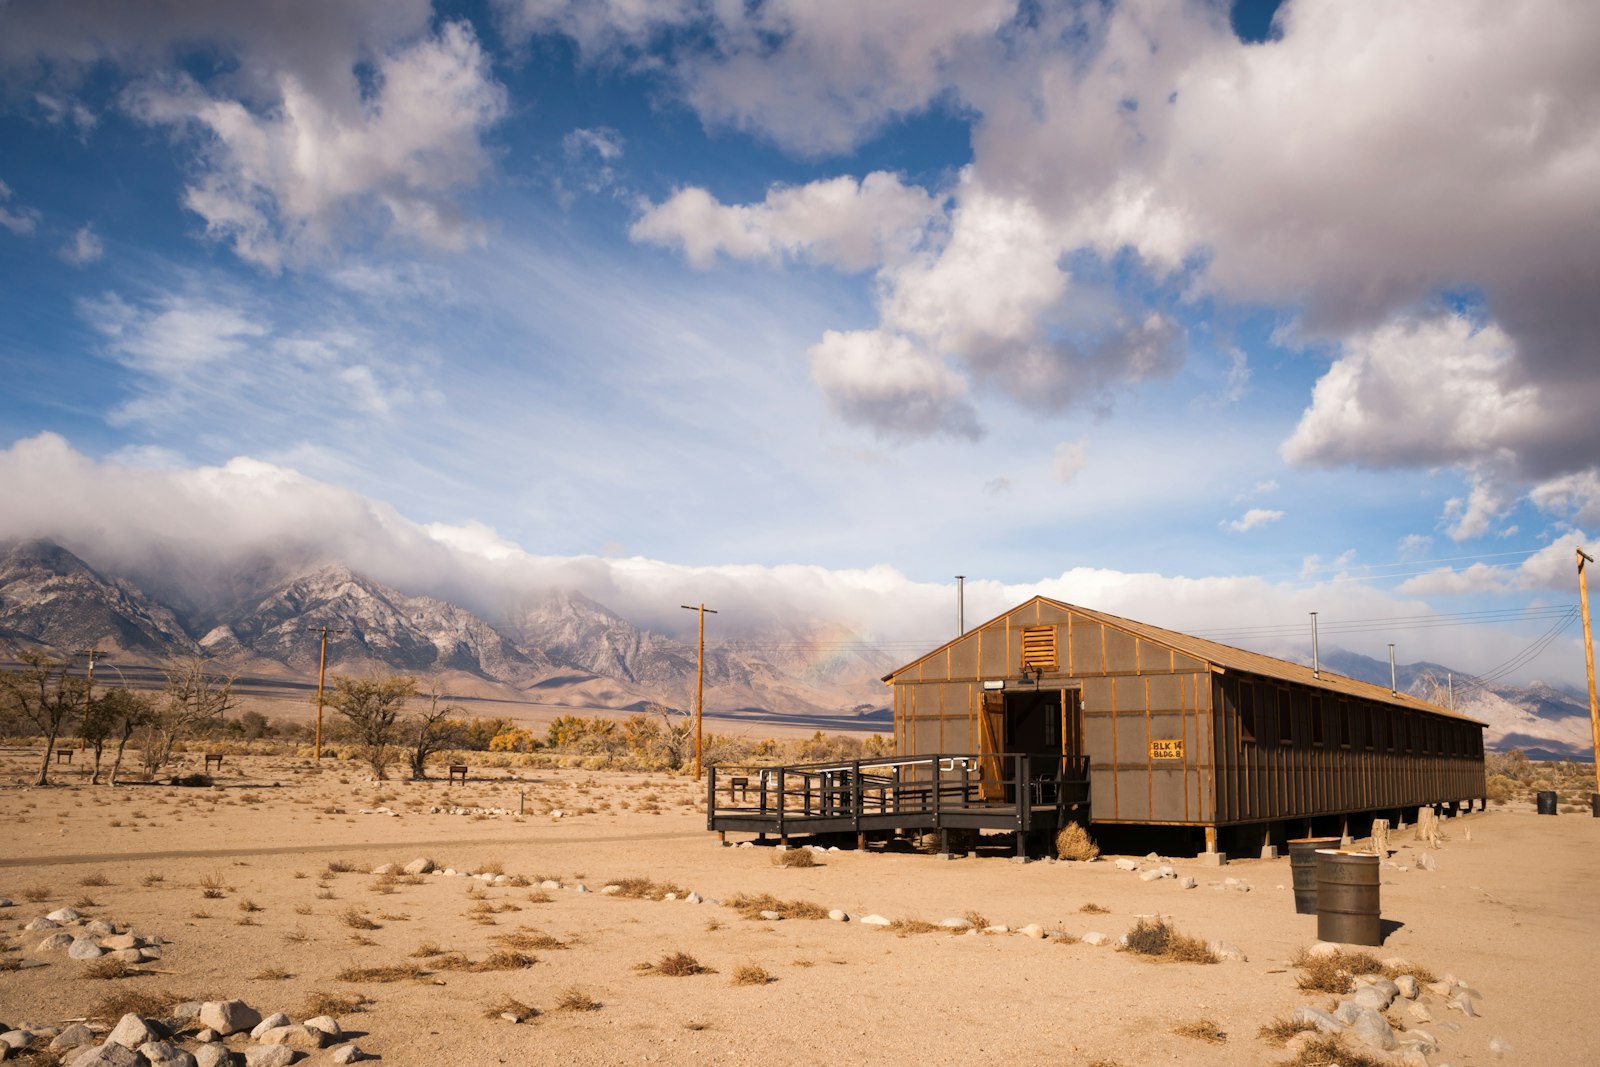 In a desert landscape, a covered building stands